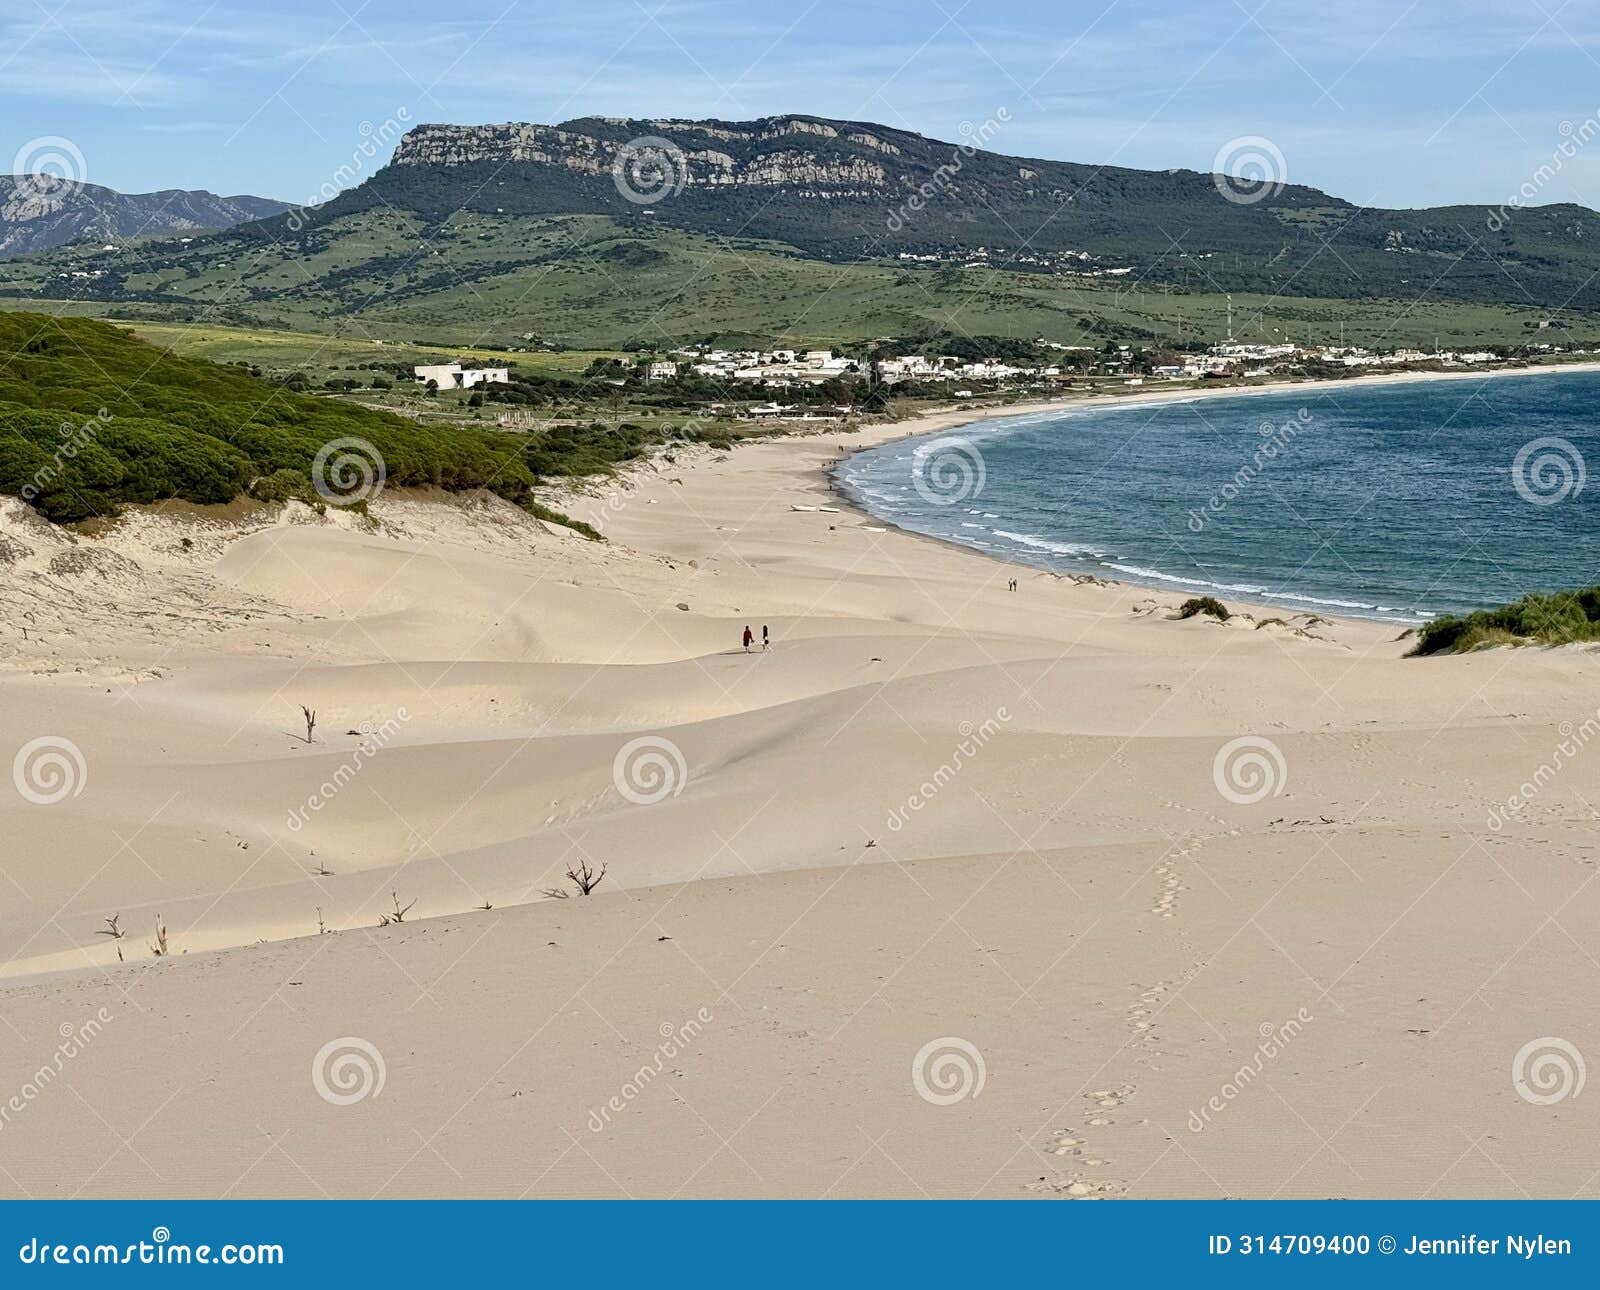 the dunes of bolonia